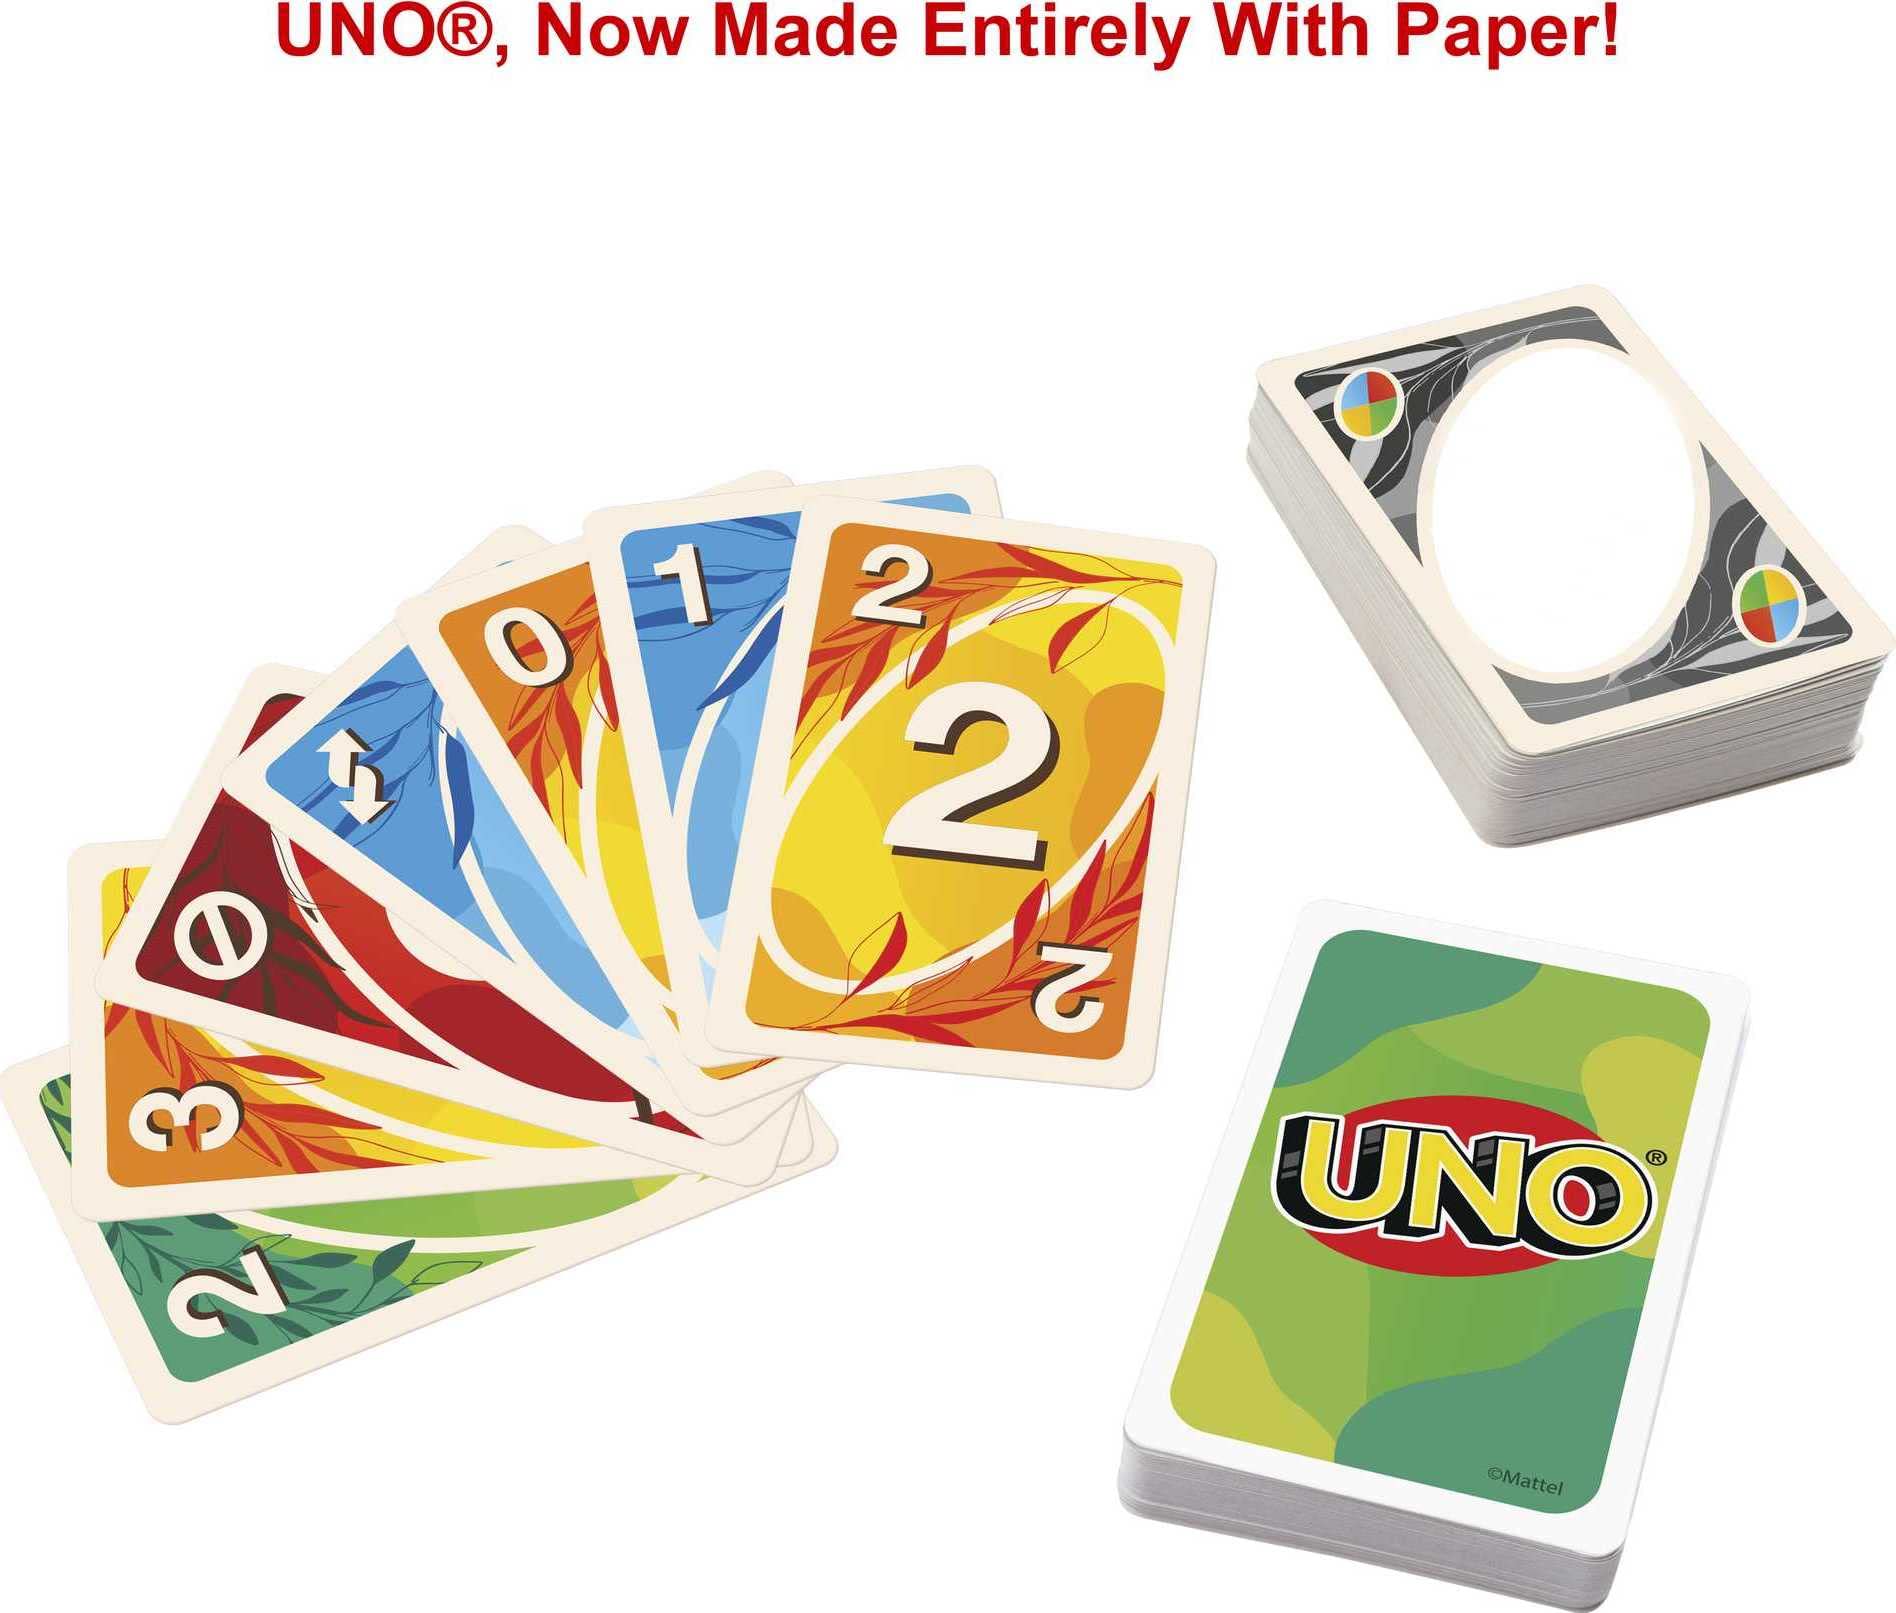 Mattel Games UNO Nothin' But Paper Card Game, Family Game with 100 Percent Paper and Fully Recyclable for 2-10 Players